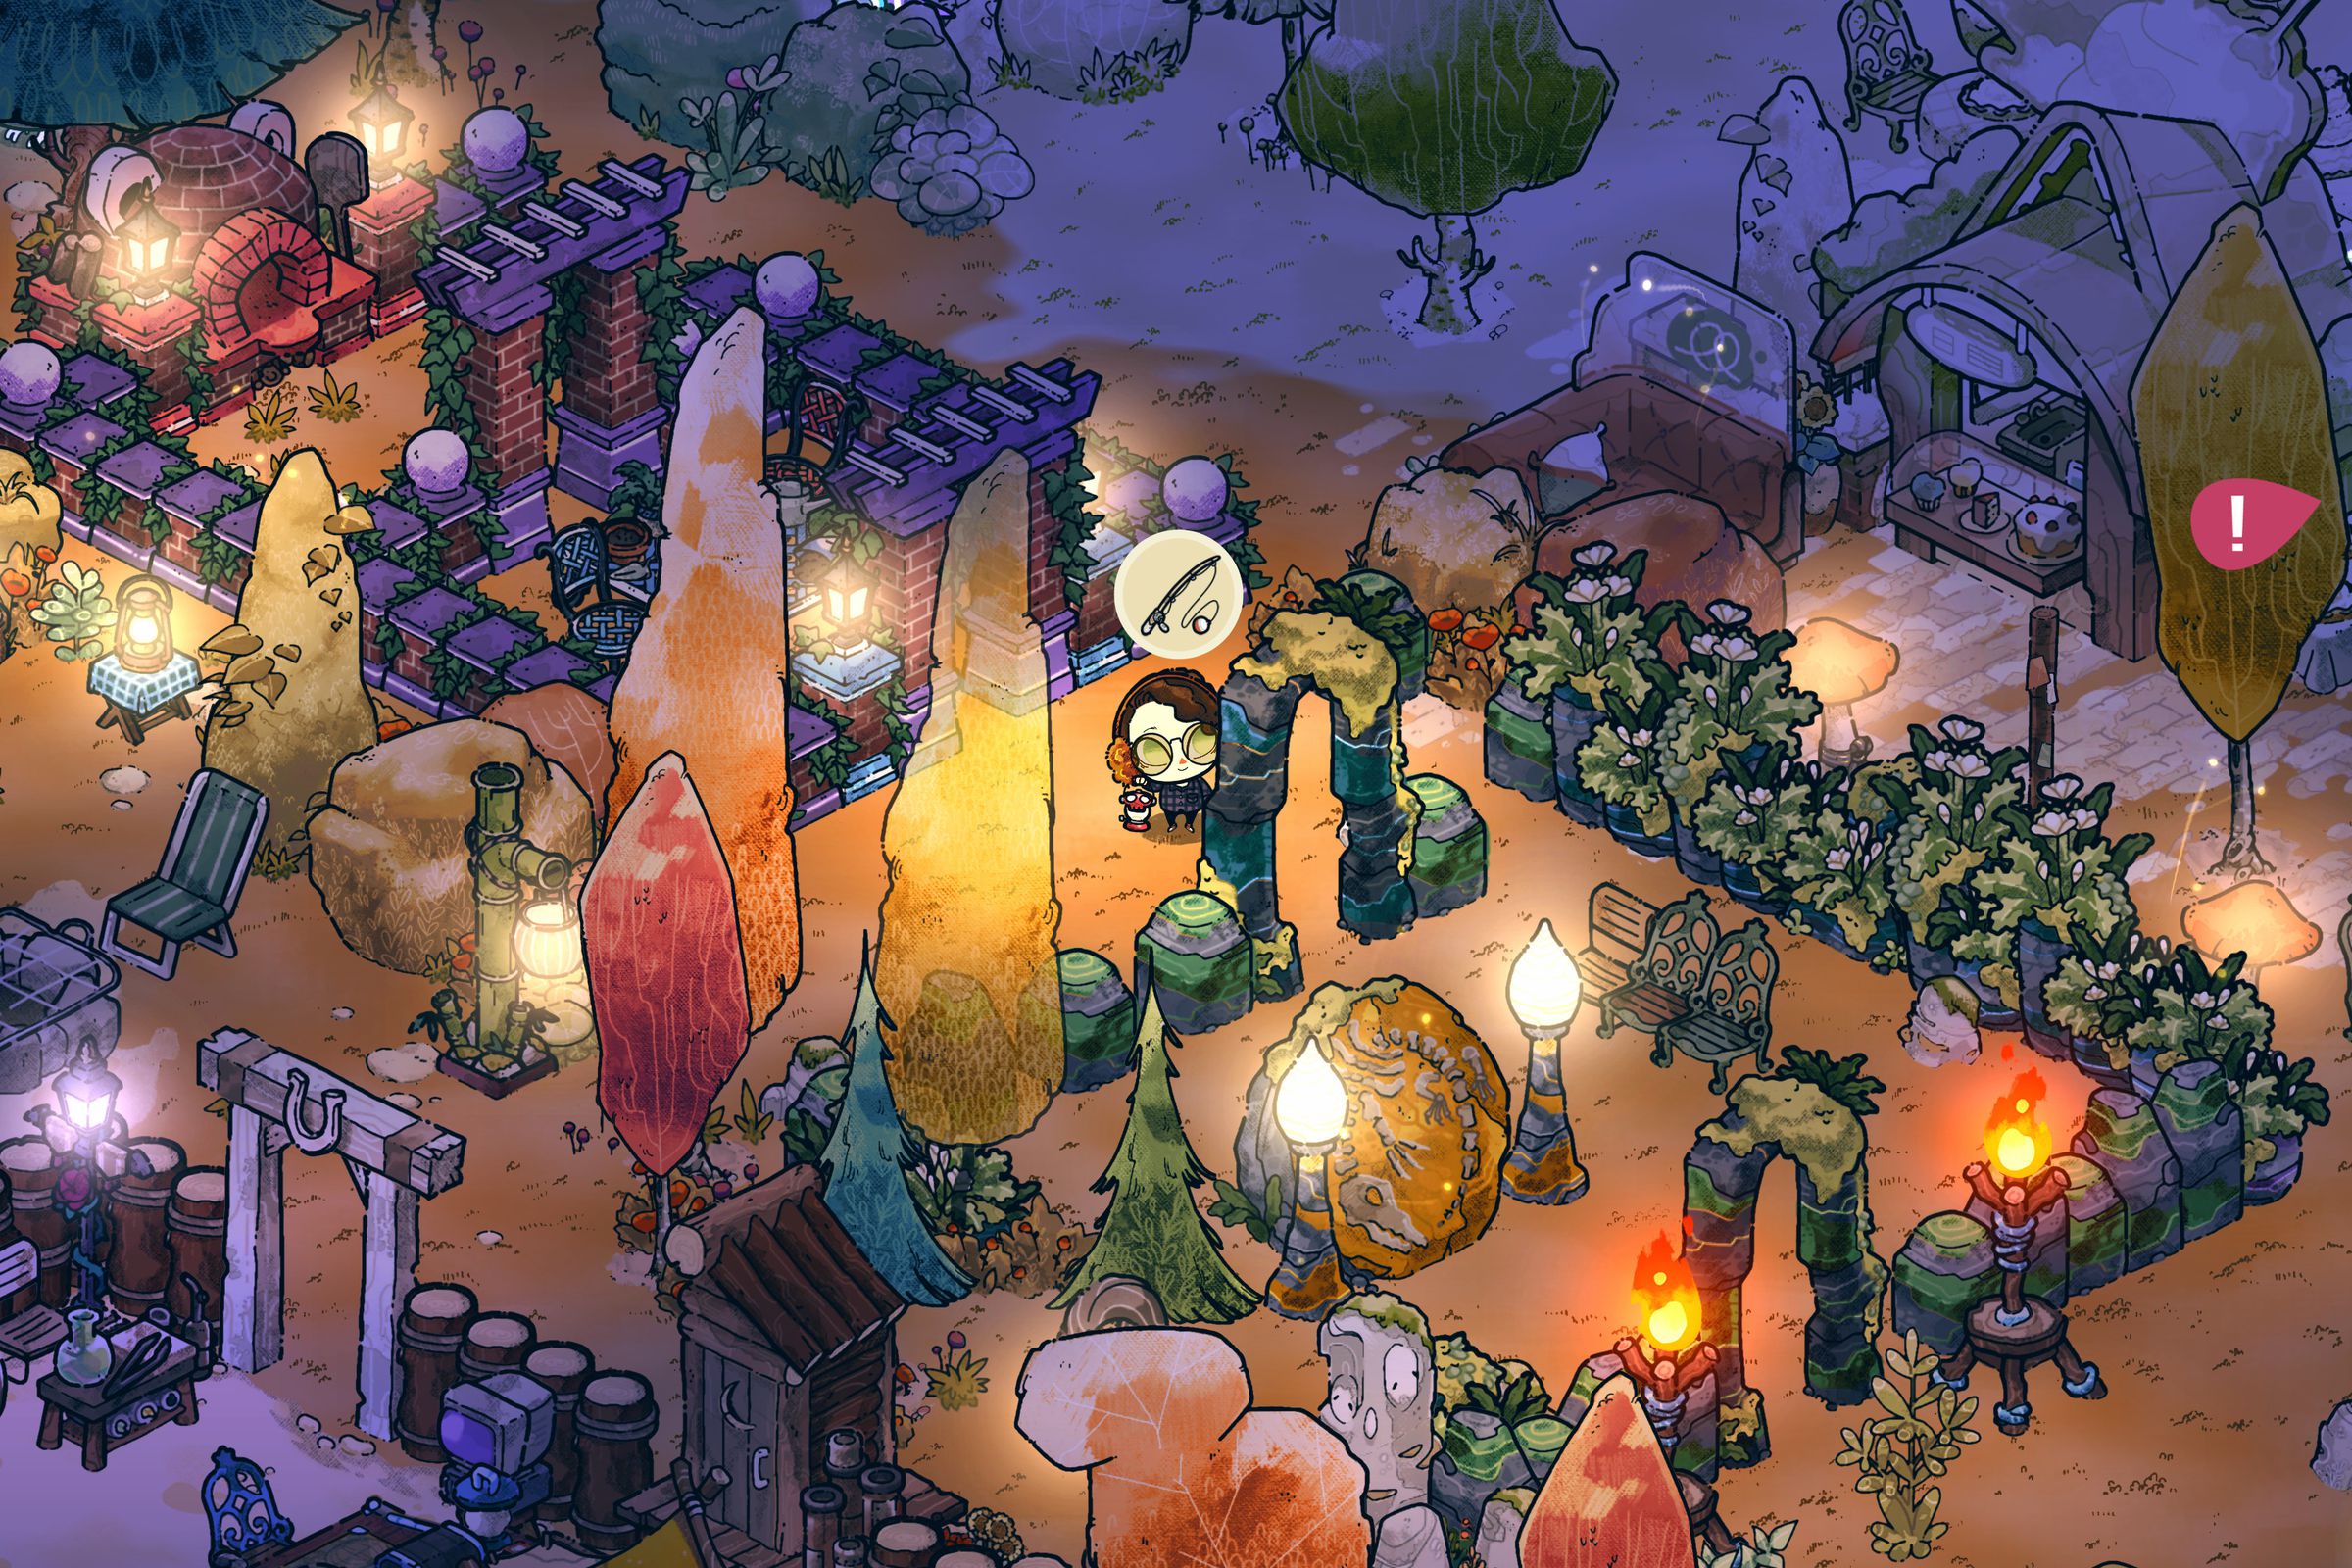 A screenshot from Cozy Grove.